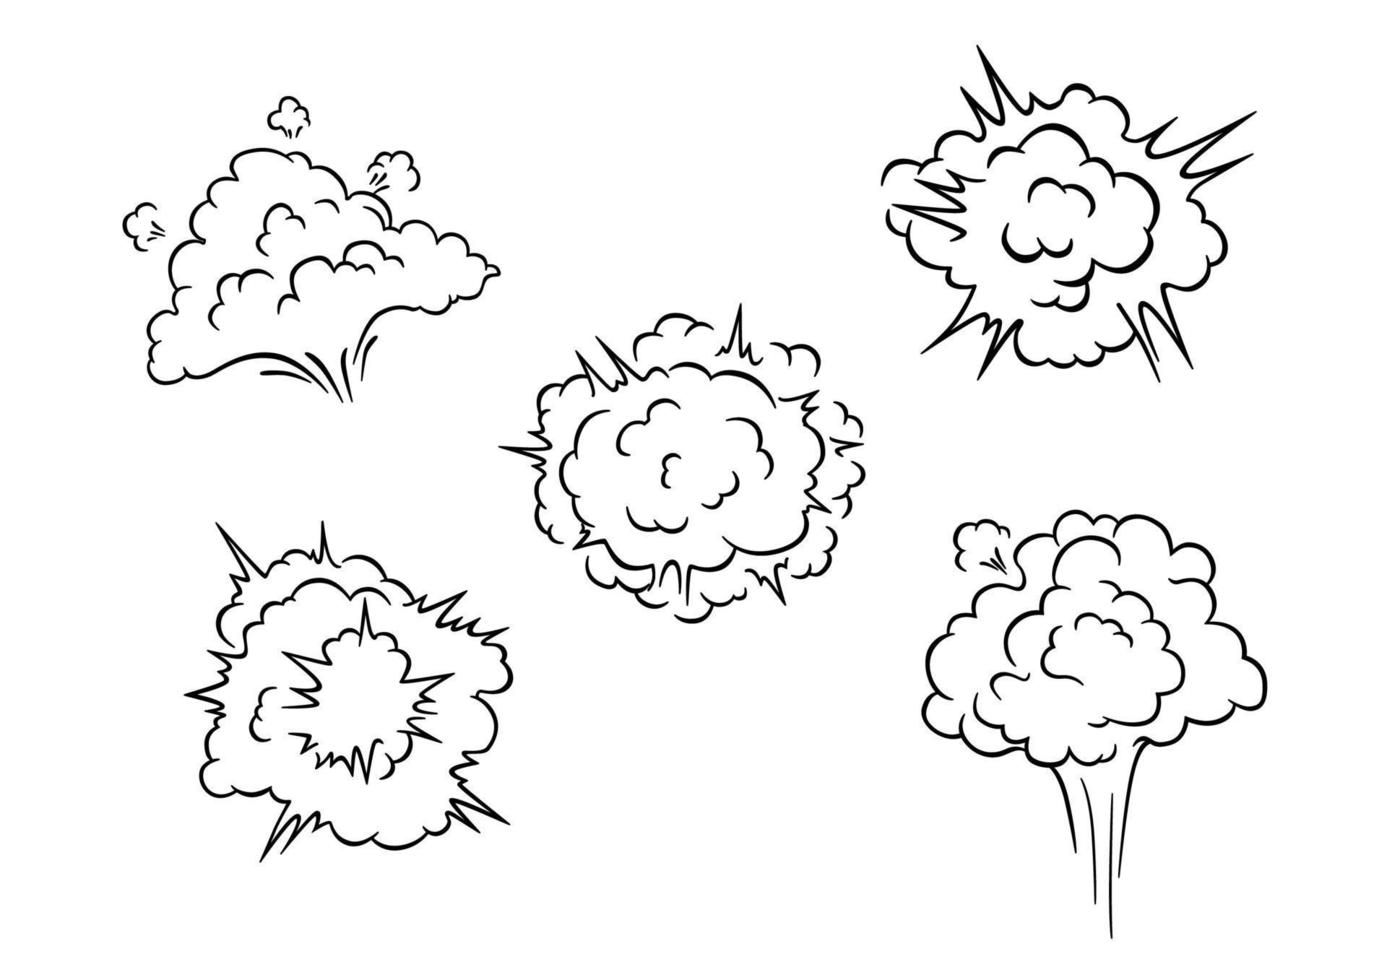 Cartoon clouds and explosions vector